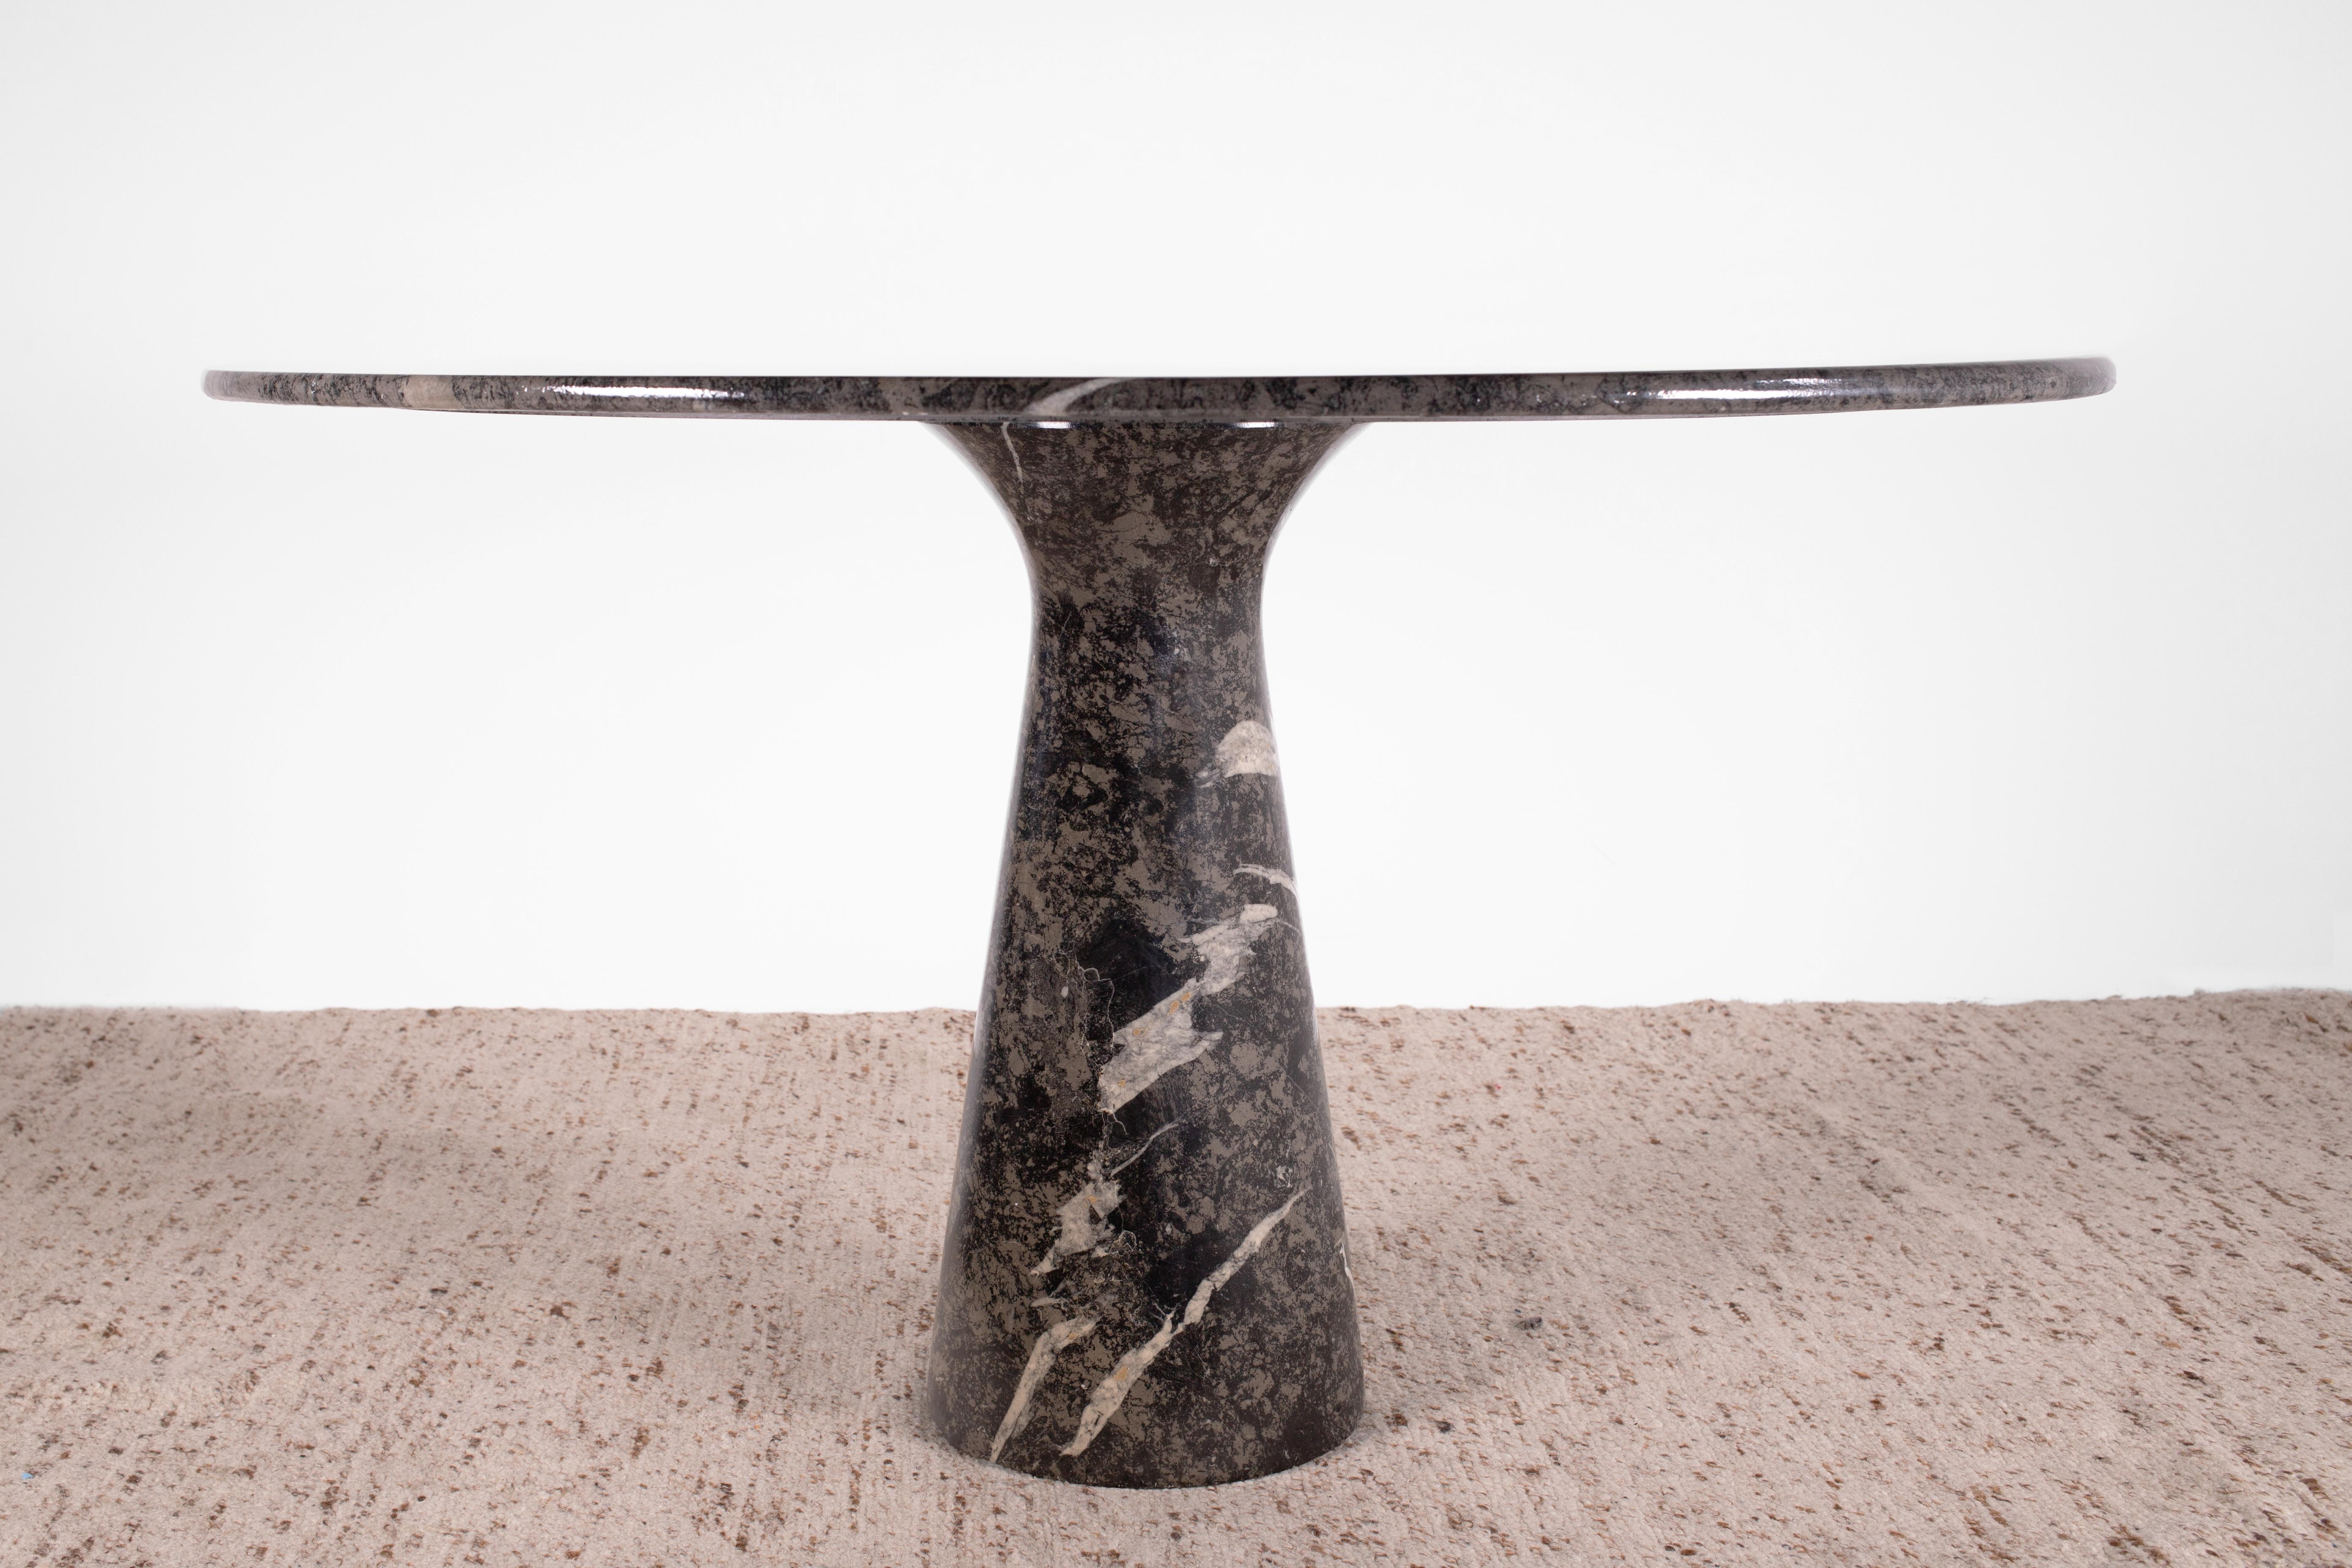 1970s Organic Modern Angelo Mangiarotti round pedestal dining table for Skipper in highly figured gray Fior Di Bosco marble. This table is from the M-series and measures 47in (120cm) in diameter.

The detachable round table top has clearly been